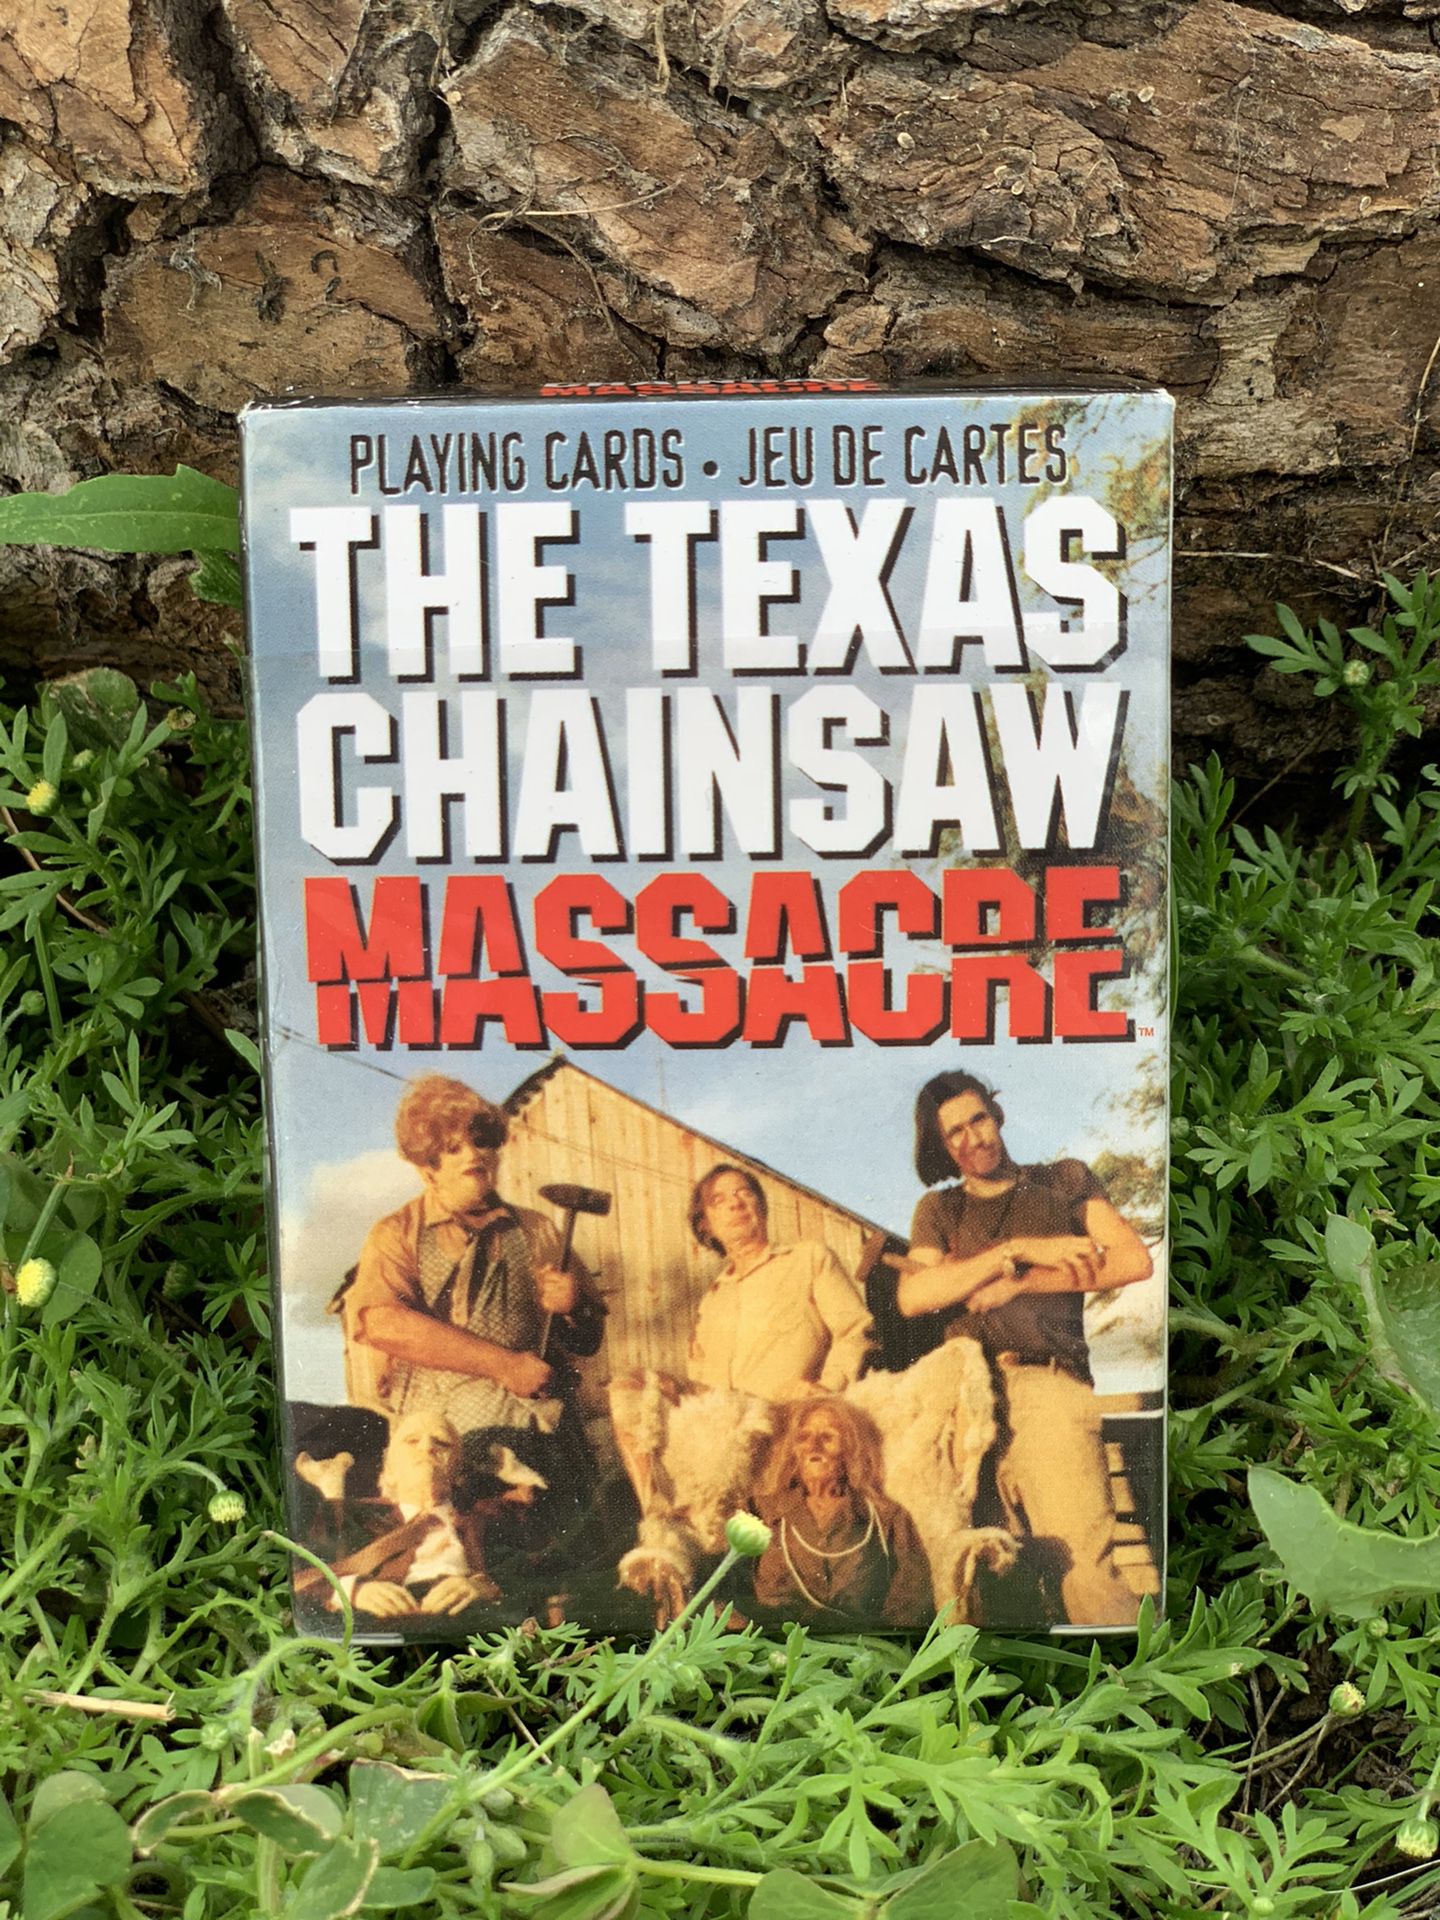 The Texas Chainsaw playing card